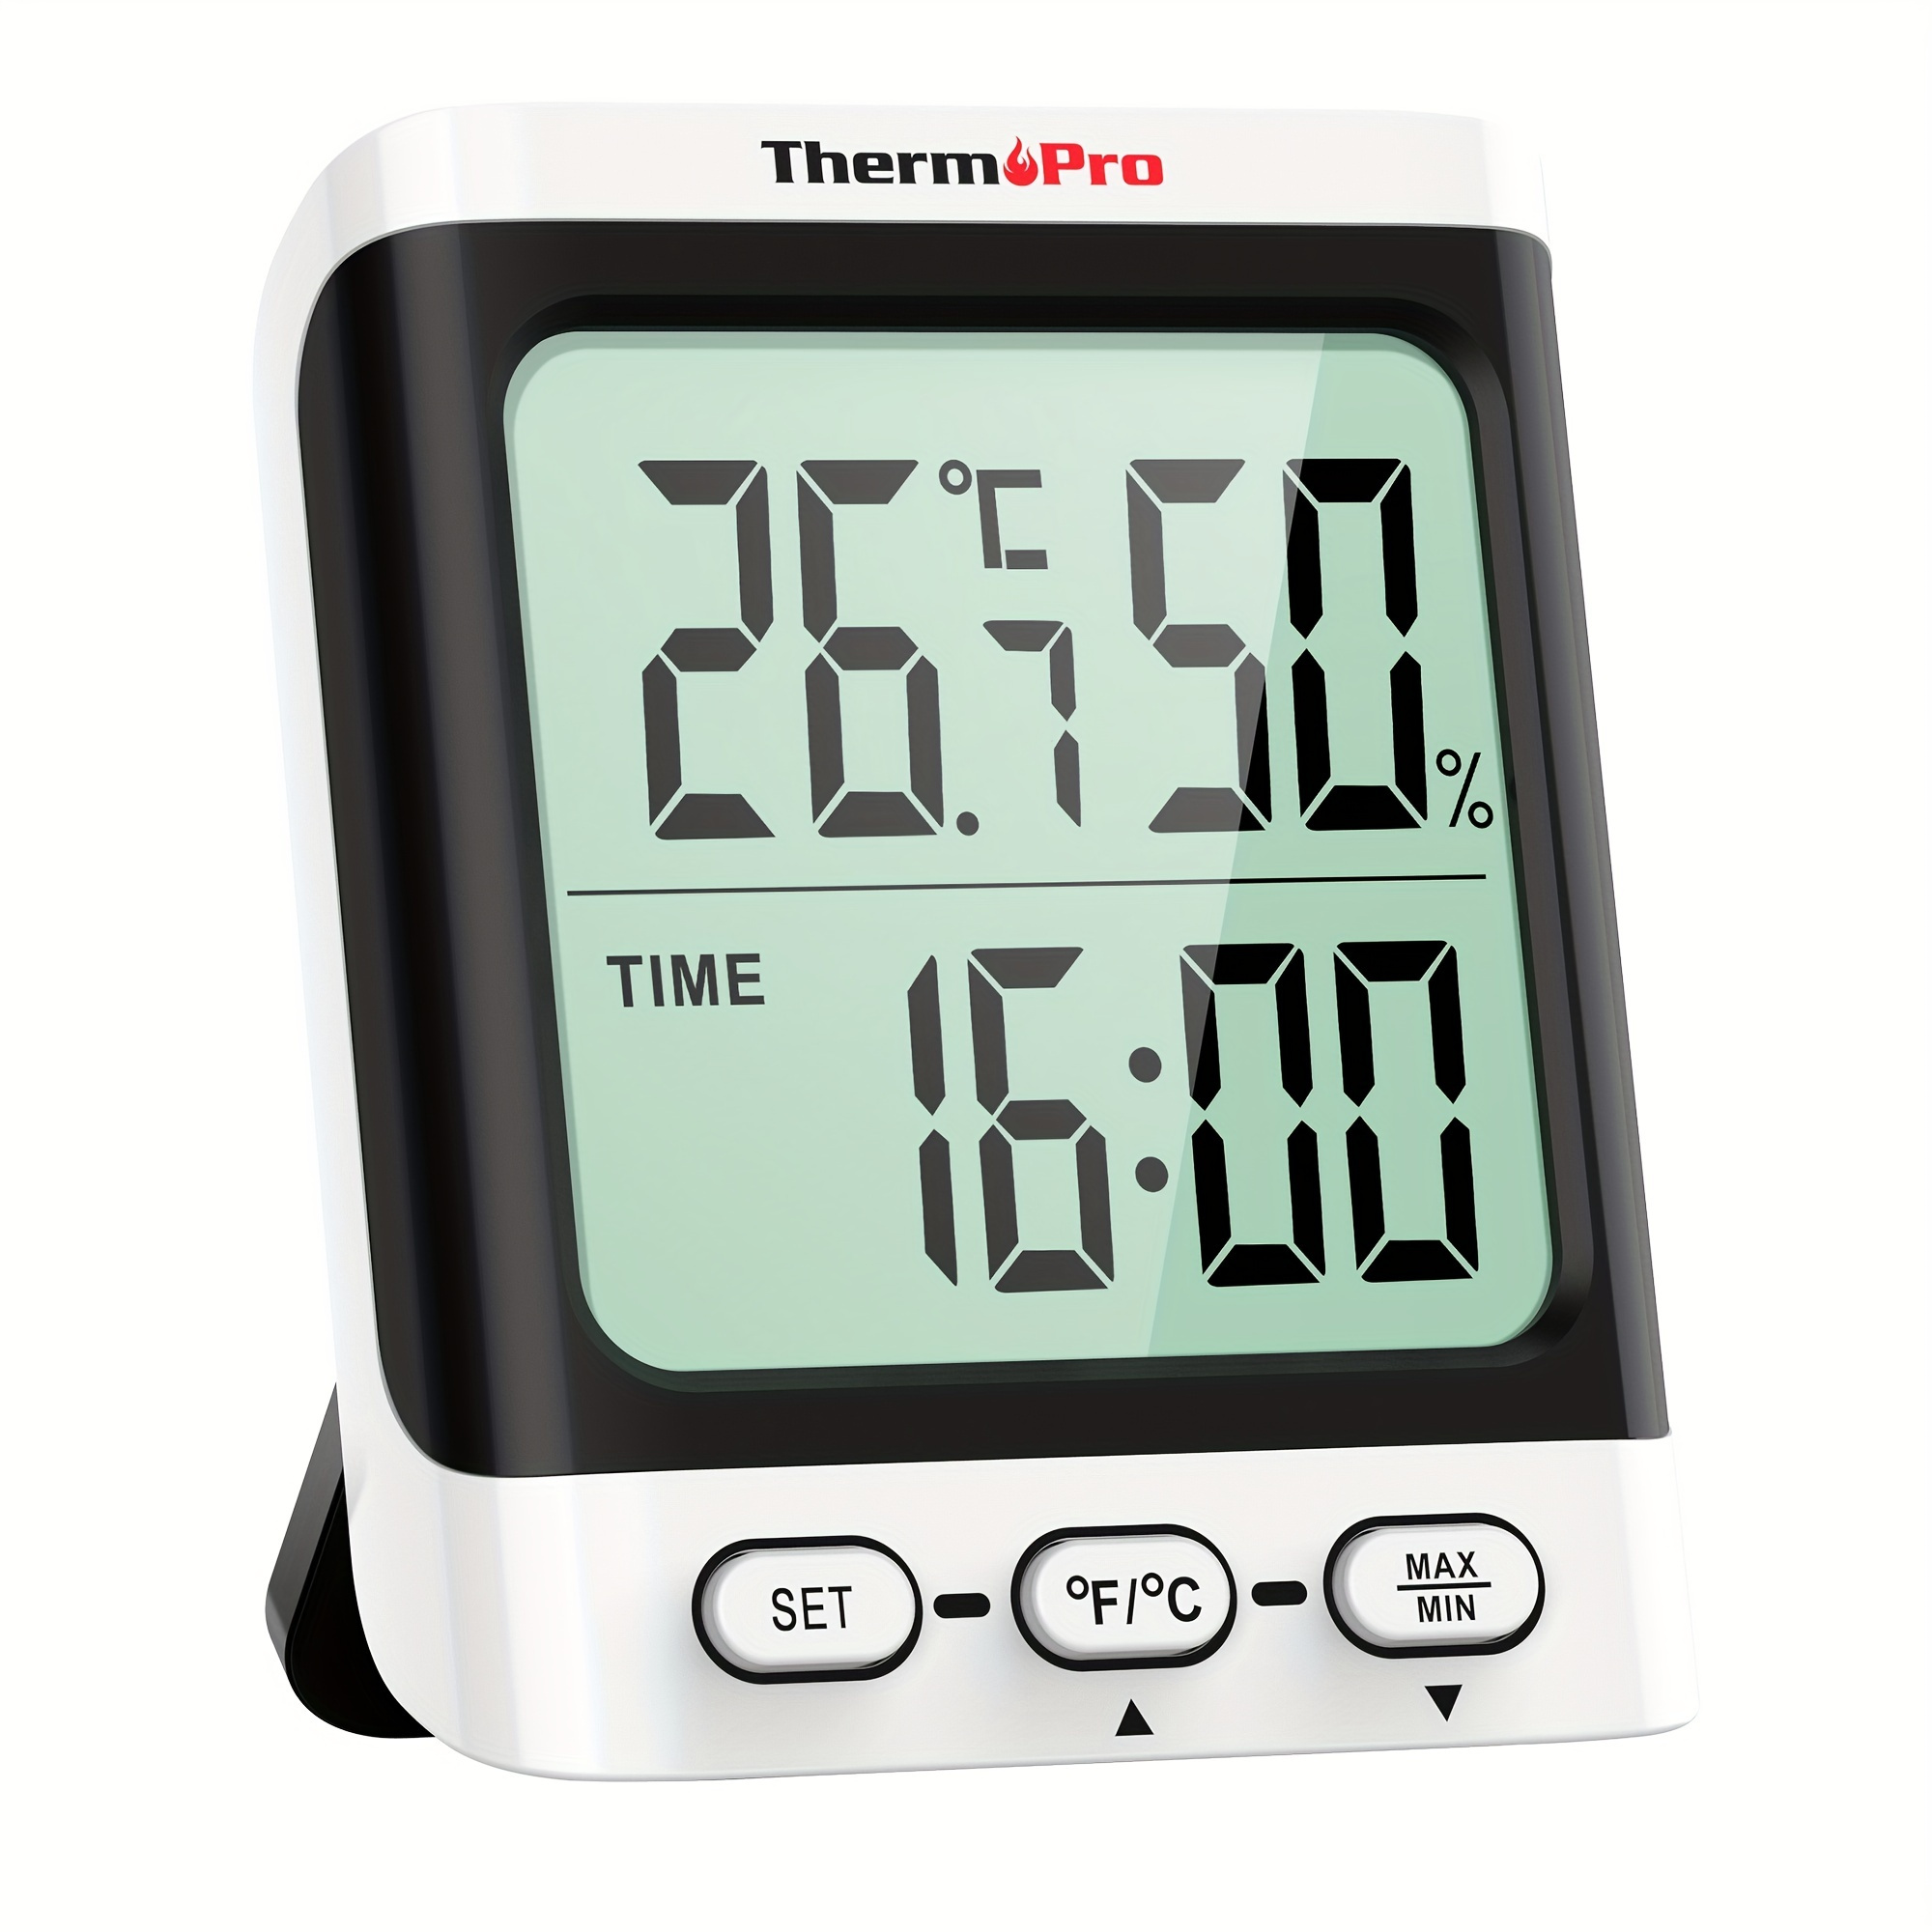 ThermoPro TP152 Hygrometer Indoor Thermometer, Desktop Digital Baby Room Thermometer with Temperature and Humidity Monitor, Accurate Humidity Gauge